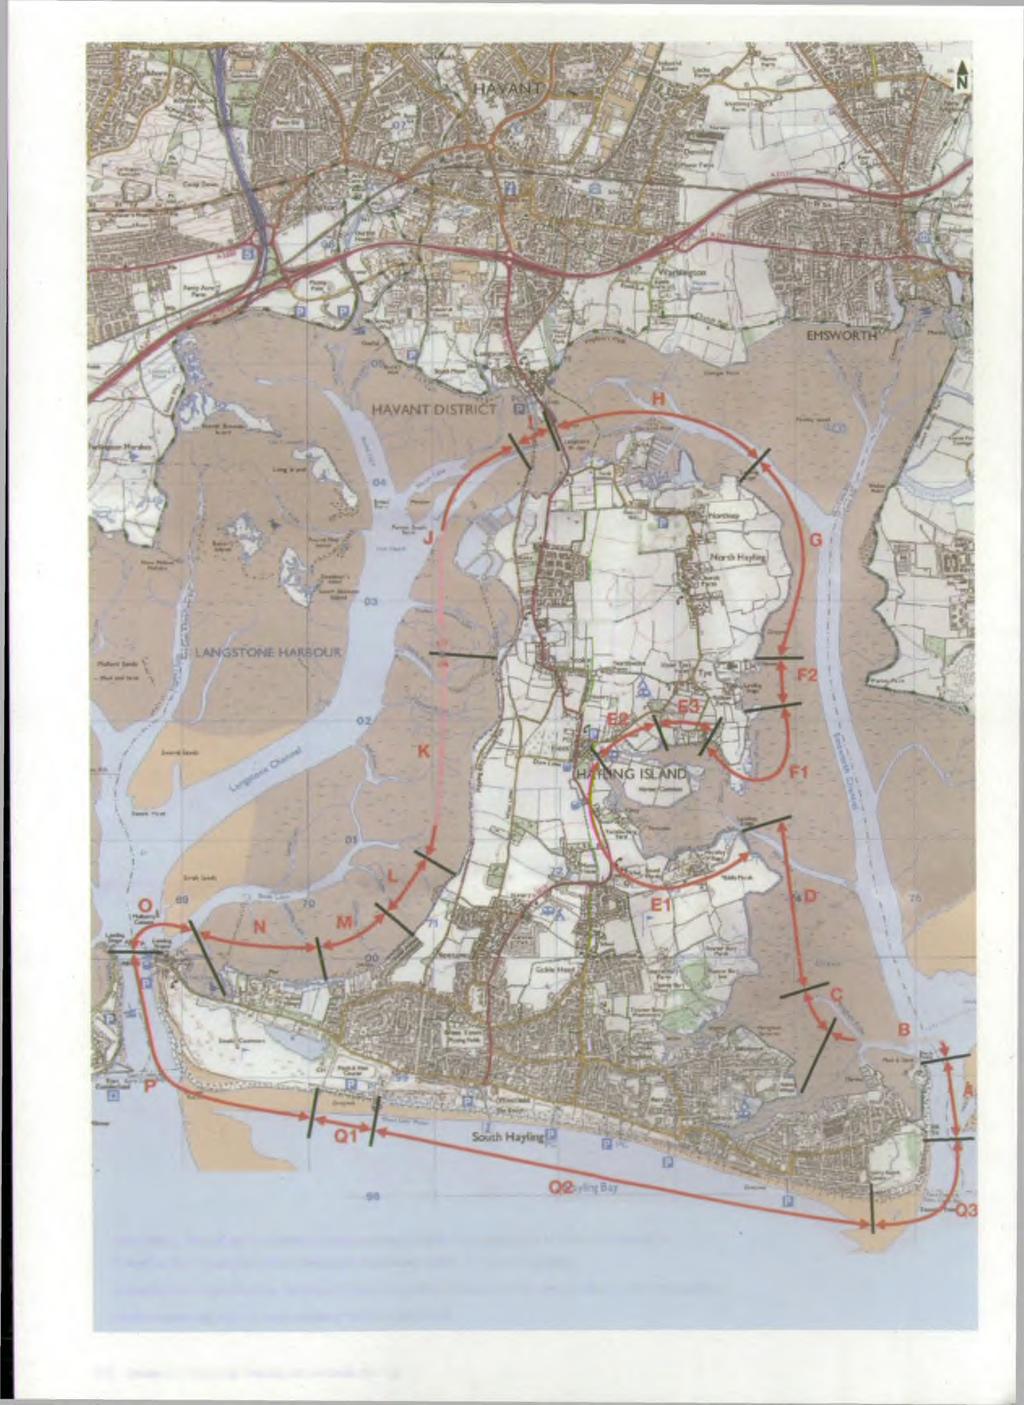 This map is based upon Ordnance Survey material with the